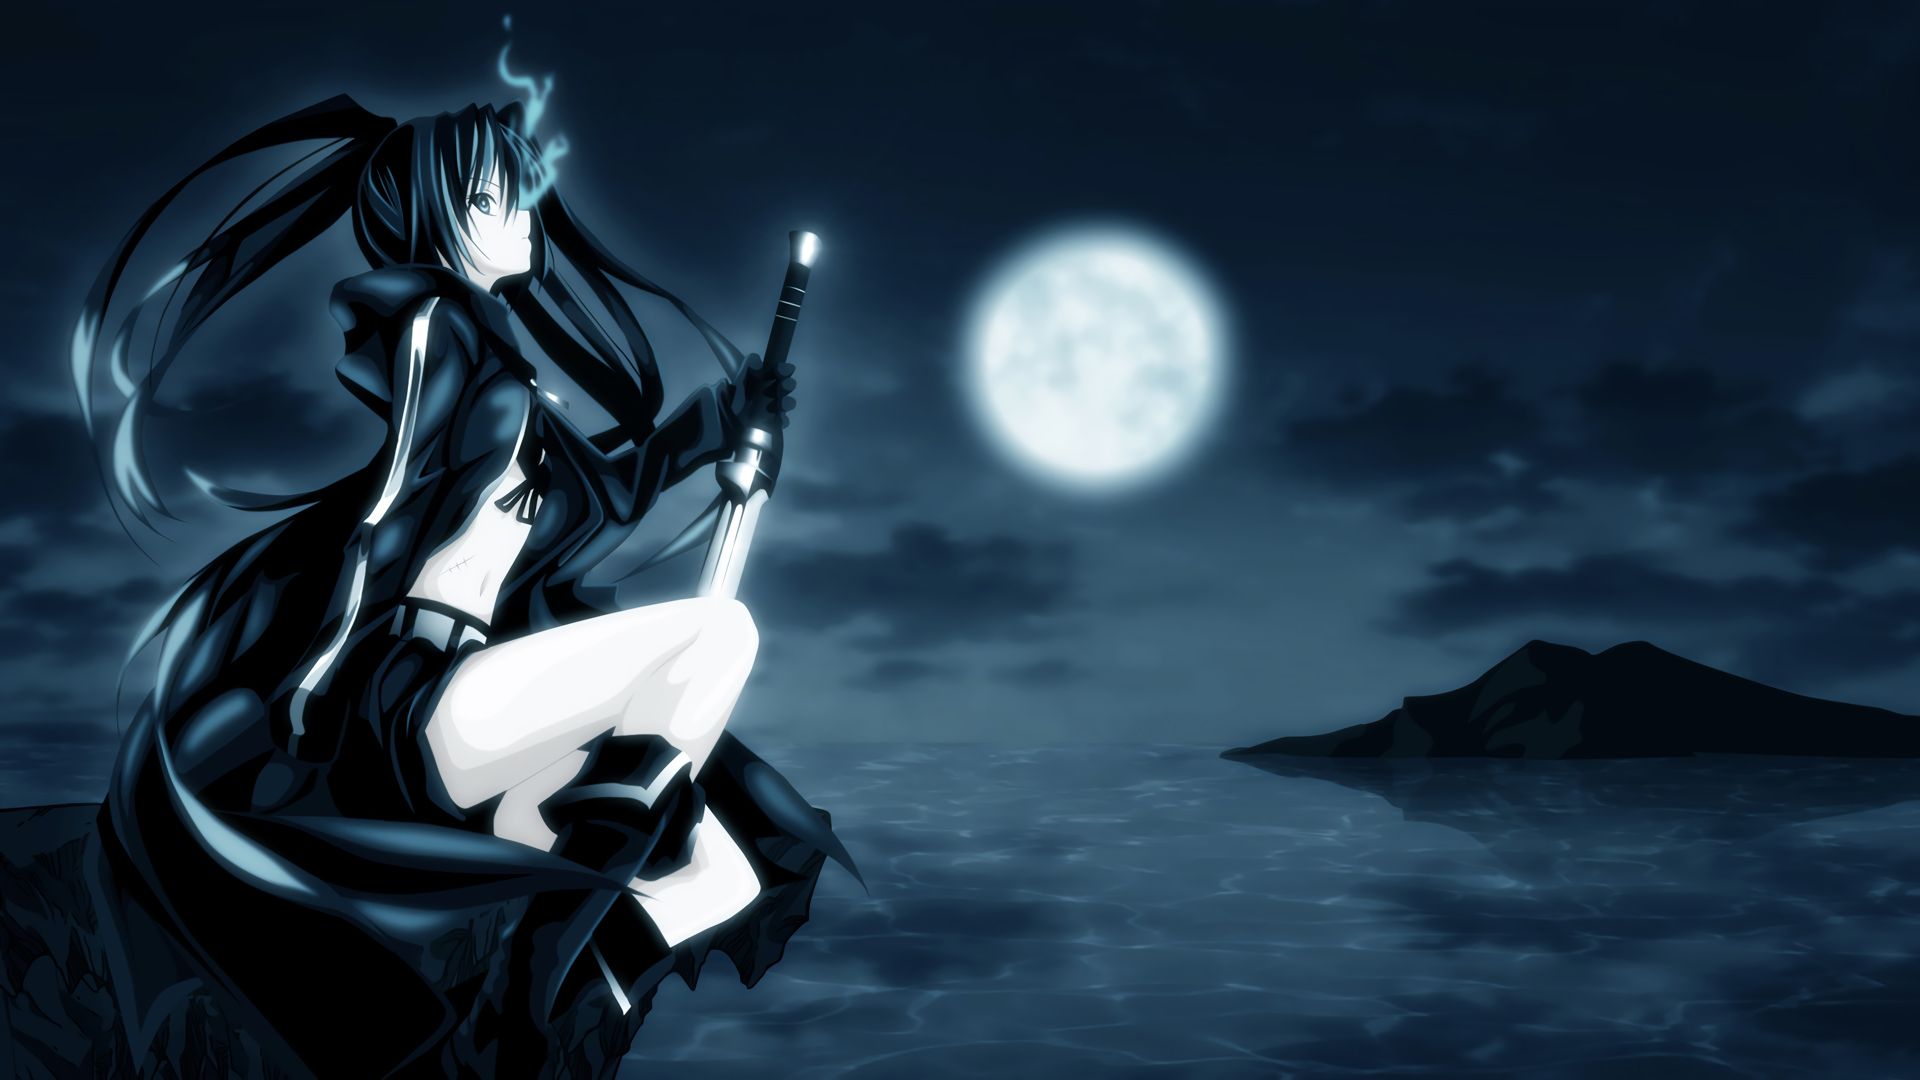 Anime Landscape Sky at night with a full moon Anime Background  Anime  background Night scenery Anime scenery wallpaper